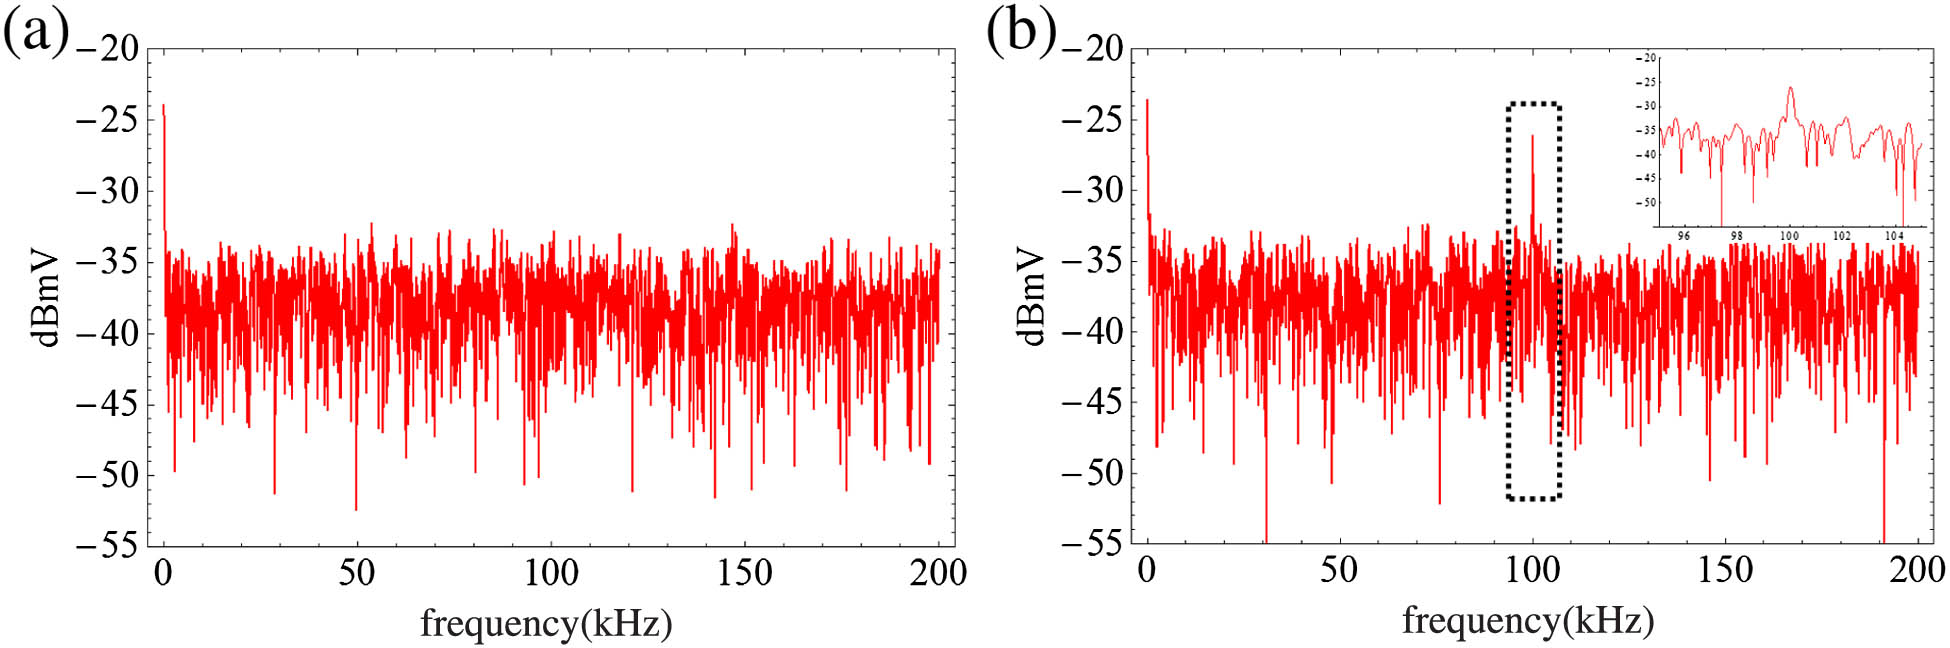 Simulation results of single photon modulation: (a) spectrum has the characteristic of white noise without modulatinon; (b) with the modulation signal, there is a peak at the modulation frequency; inset, enlargement of the rectangular region within the dashed line.